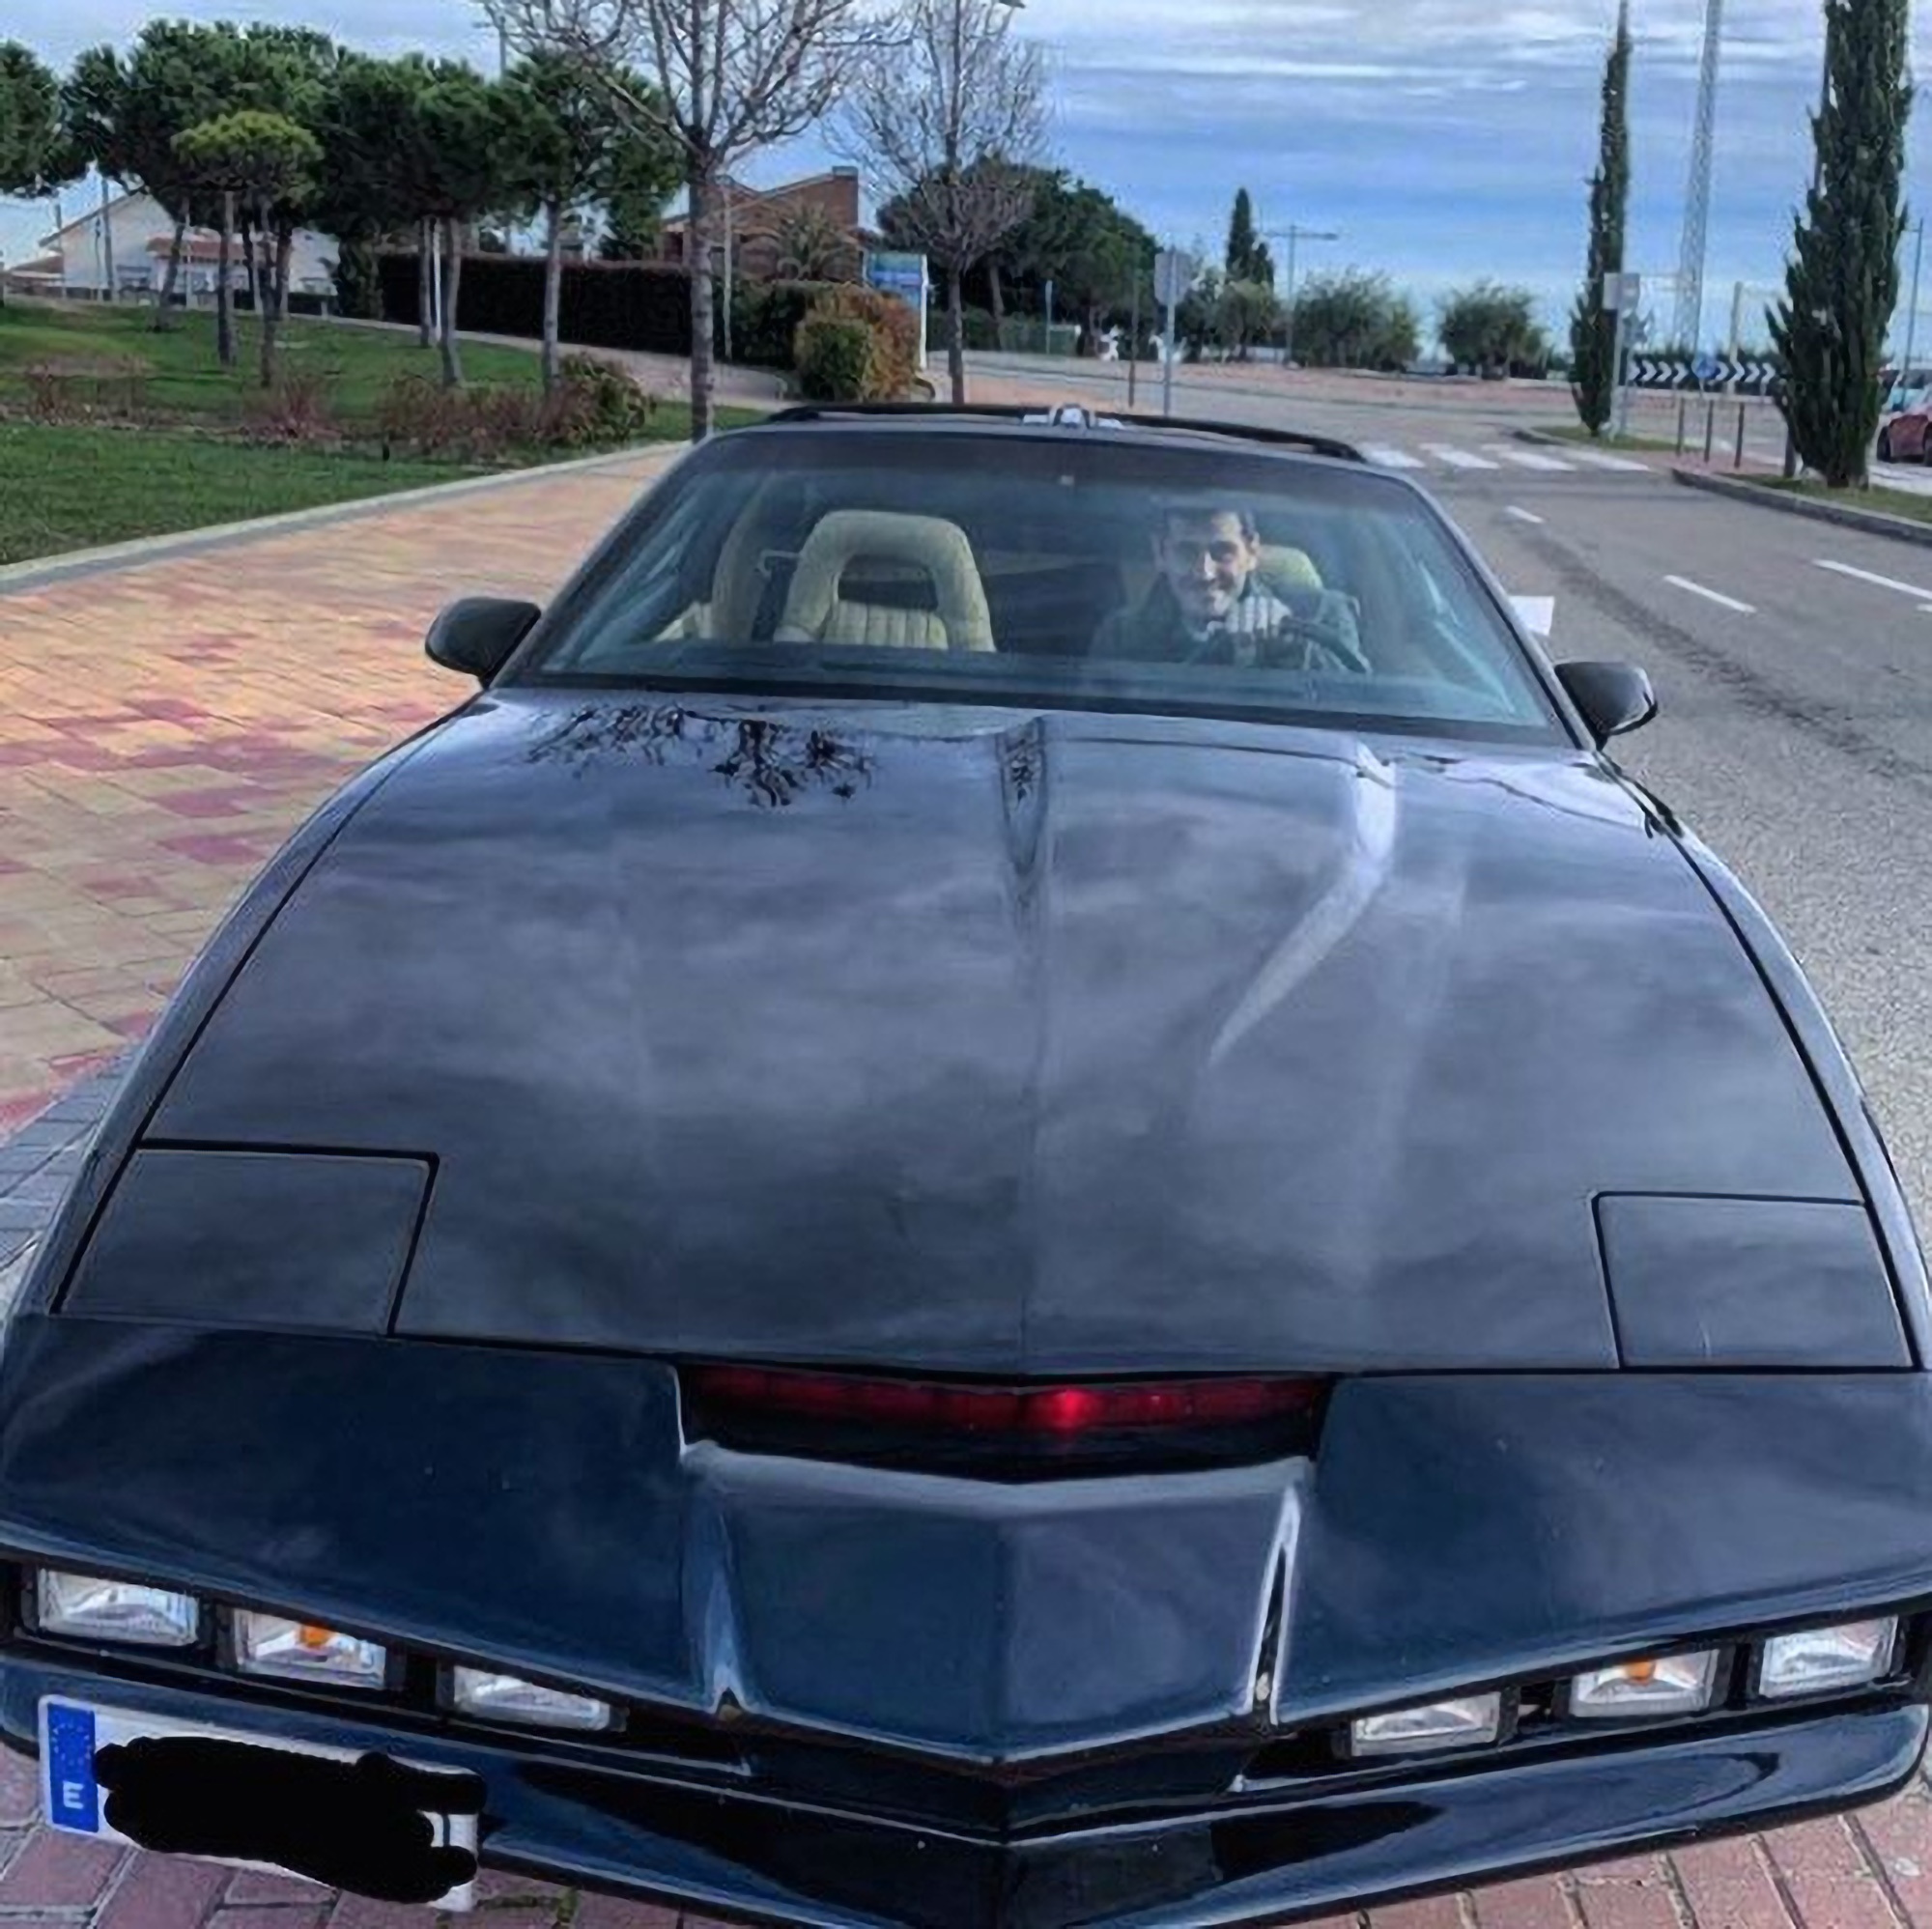 Read more about the article Knight Keeper: Ex-Real Madrid Star Casillas Buys Flashy Knight Rider Replica